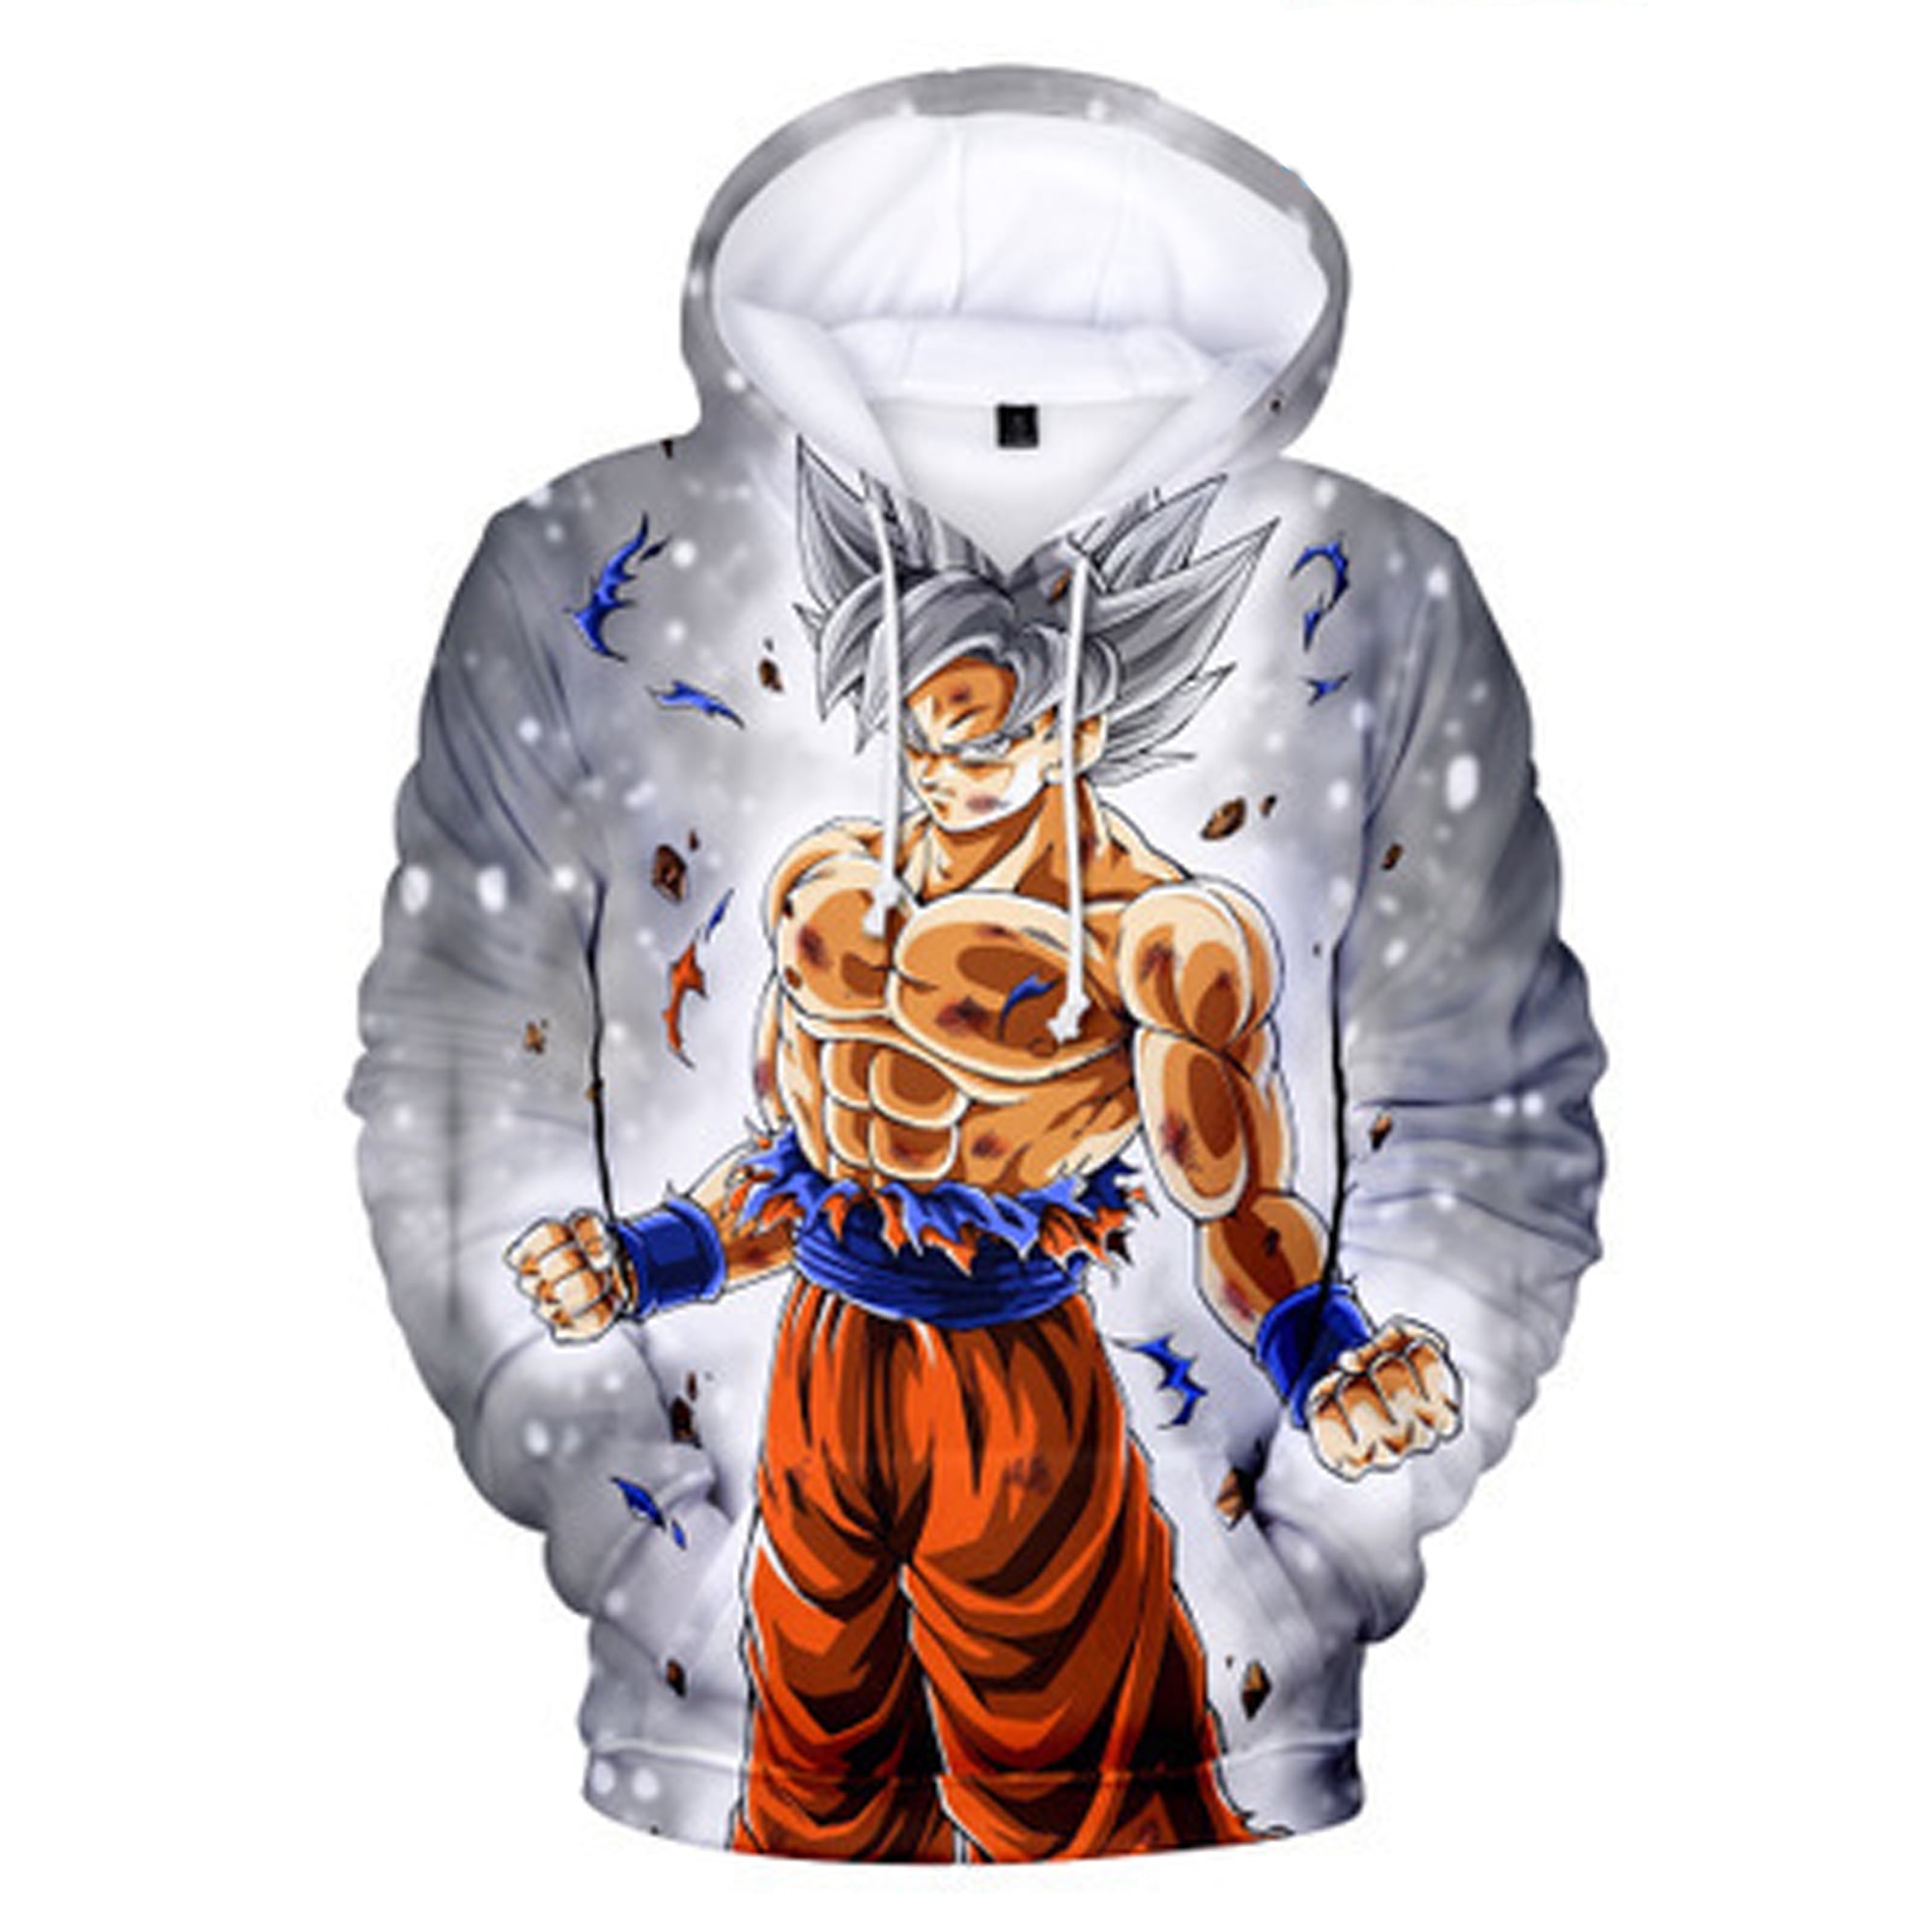 Naruto Itachi Hoodie Anime print for mens Oversized Dropshoulder